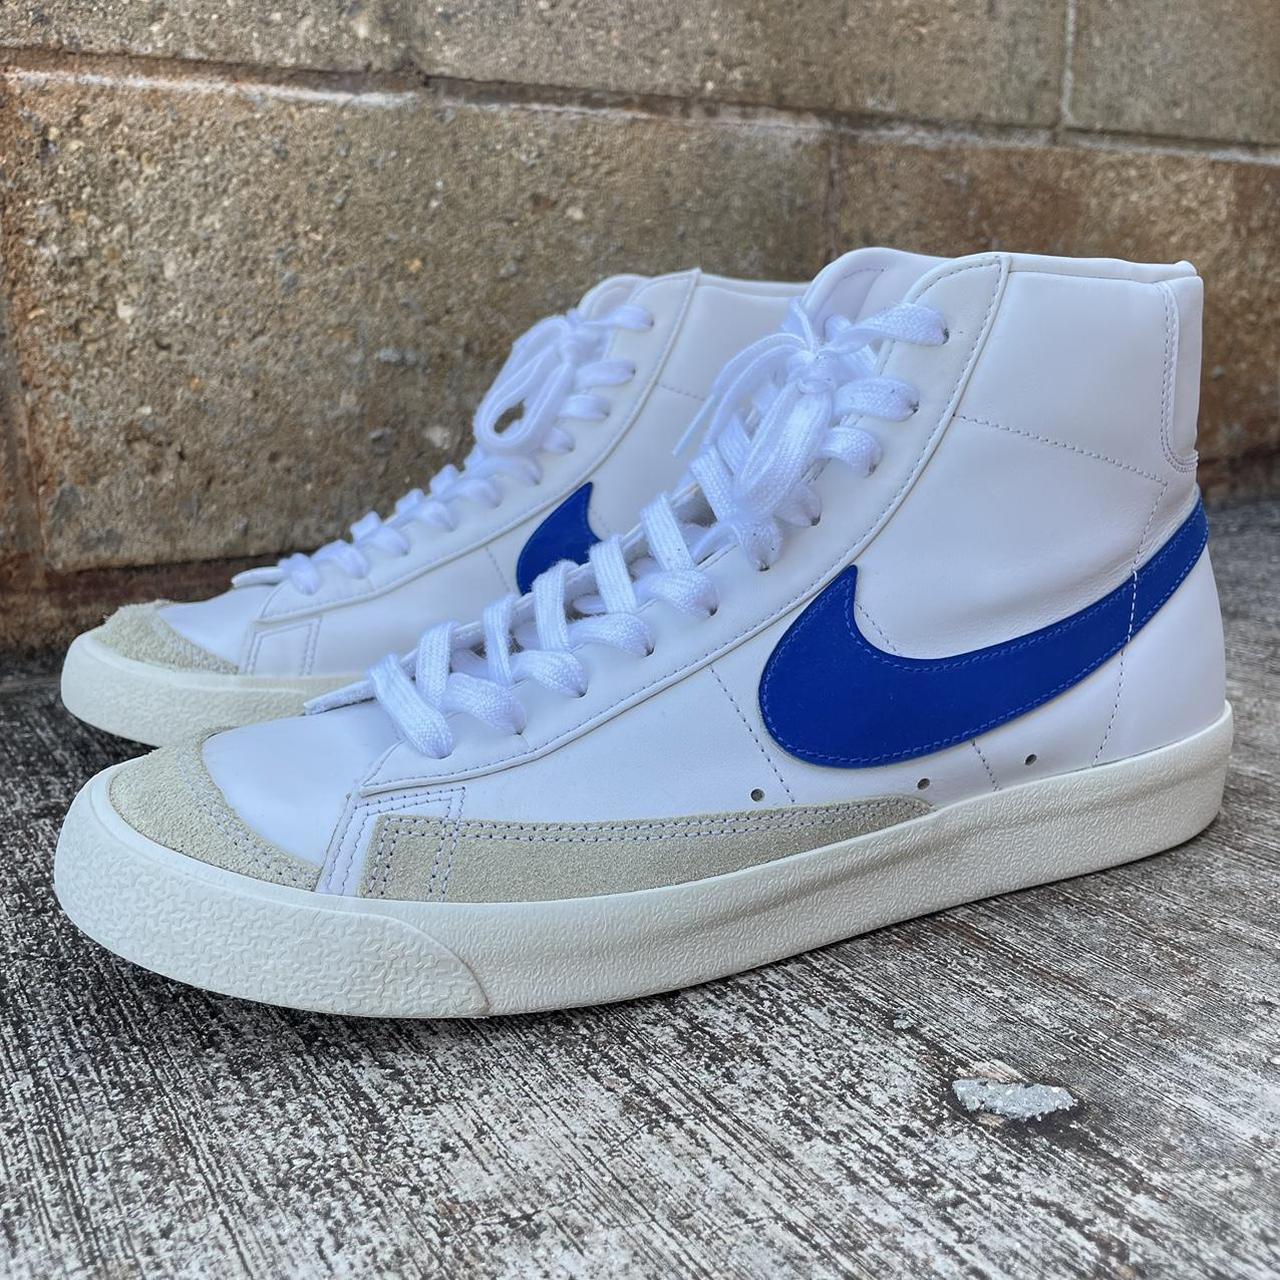 Nike Men's White and Blue Trainers